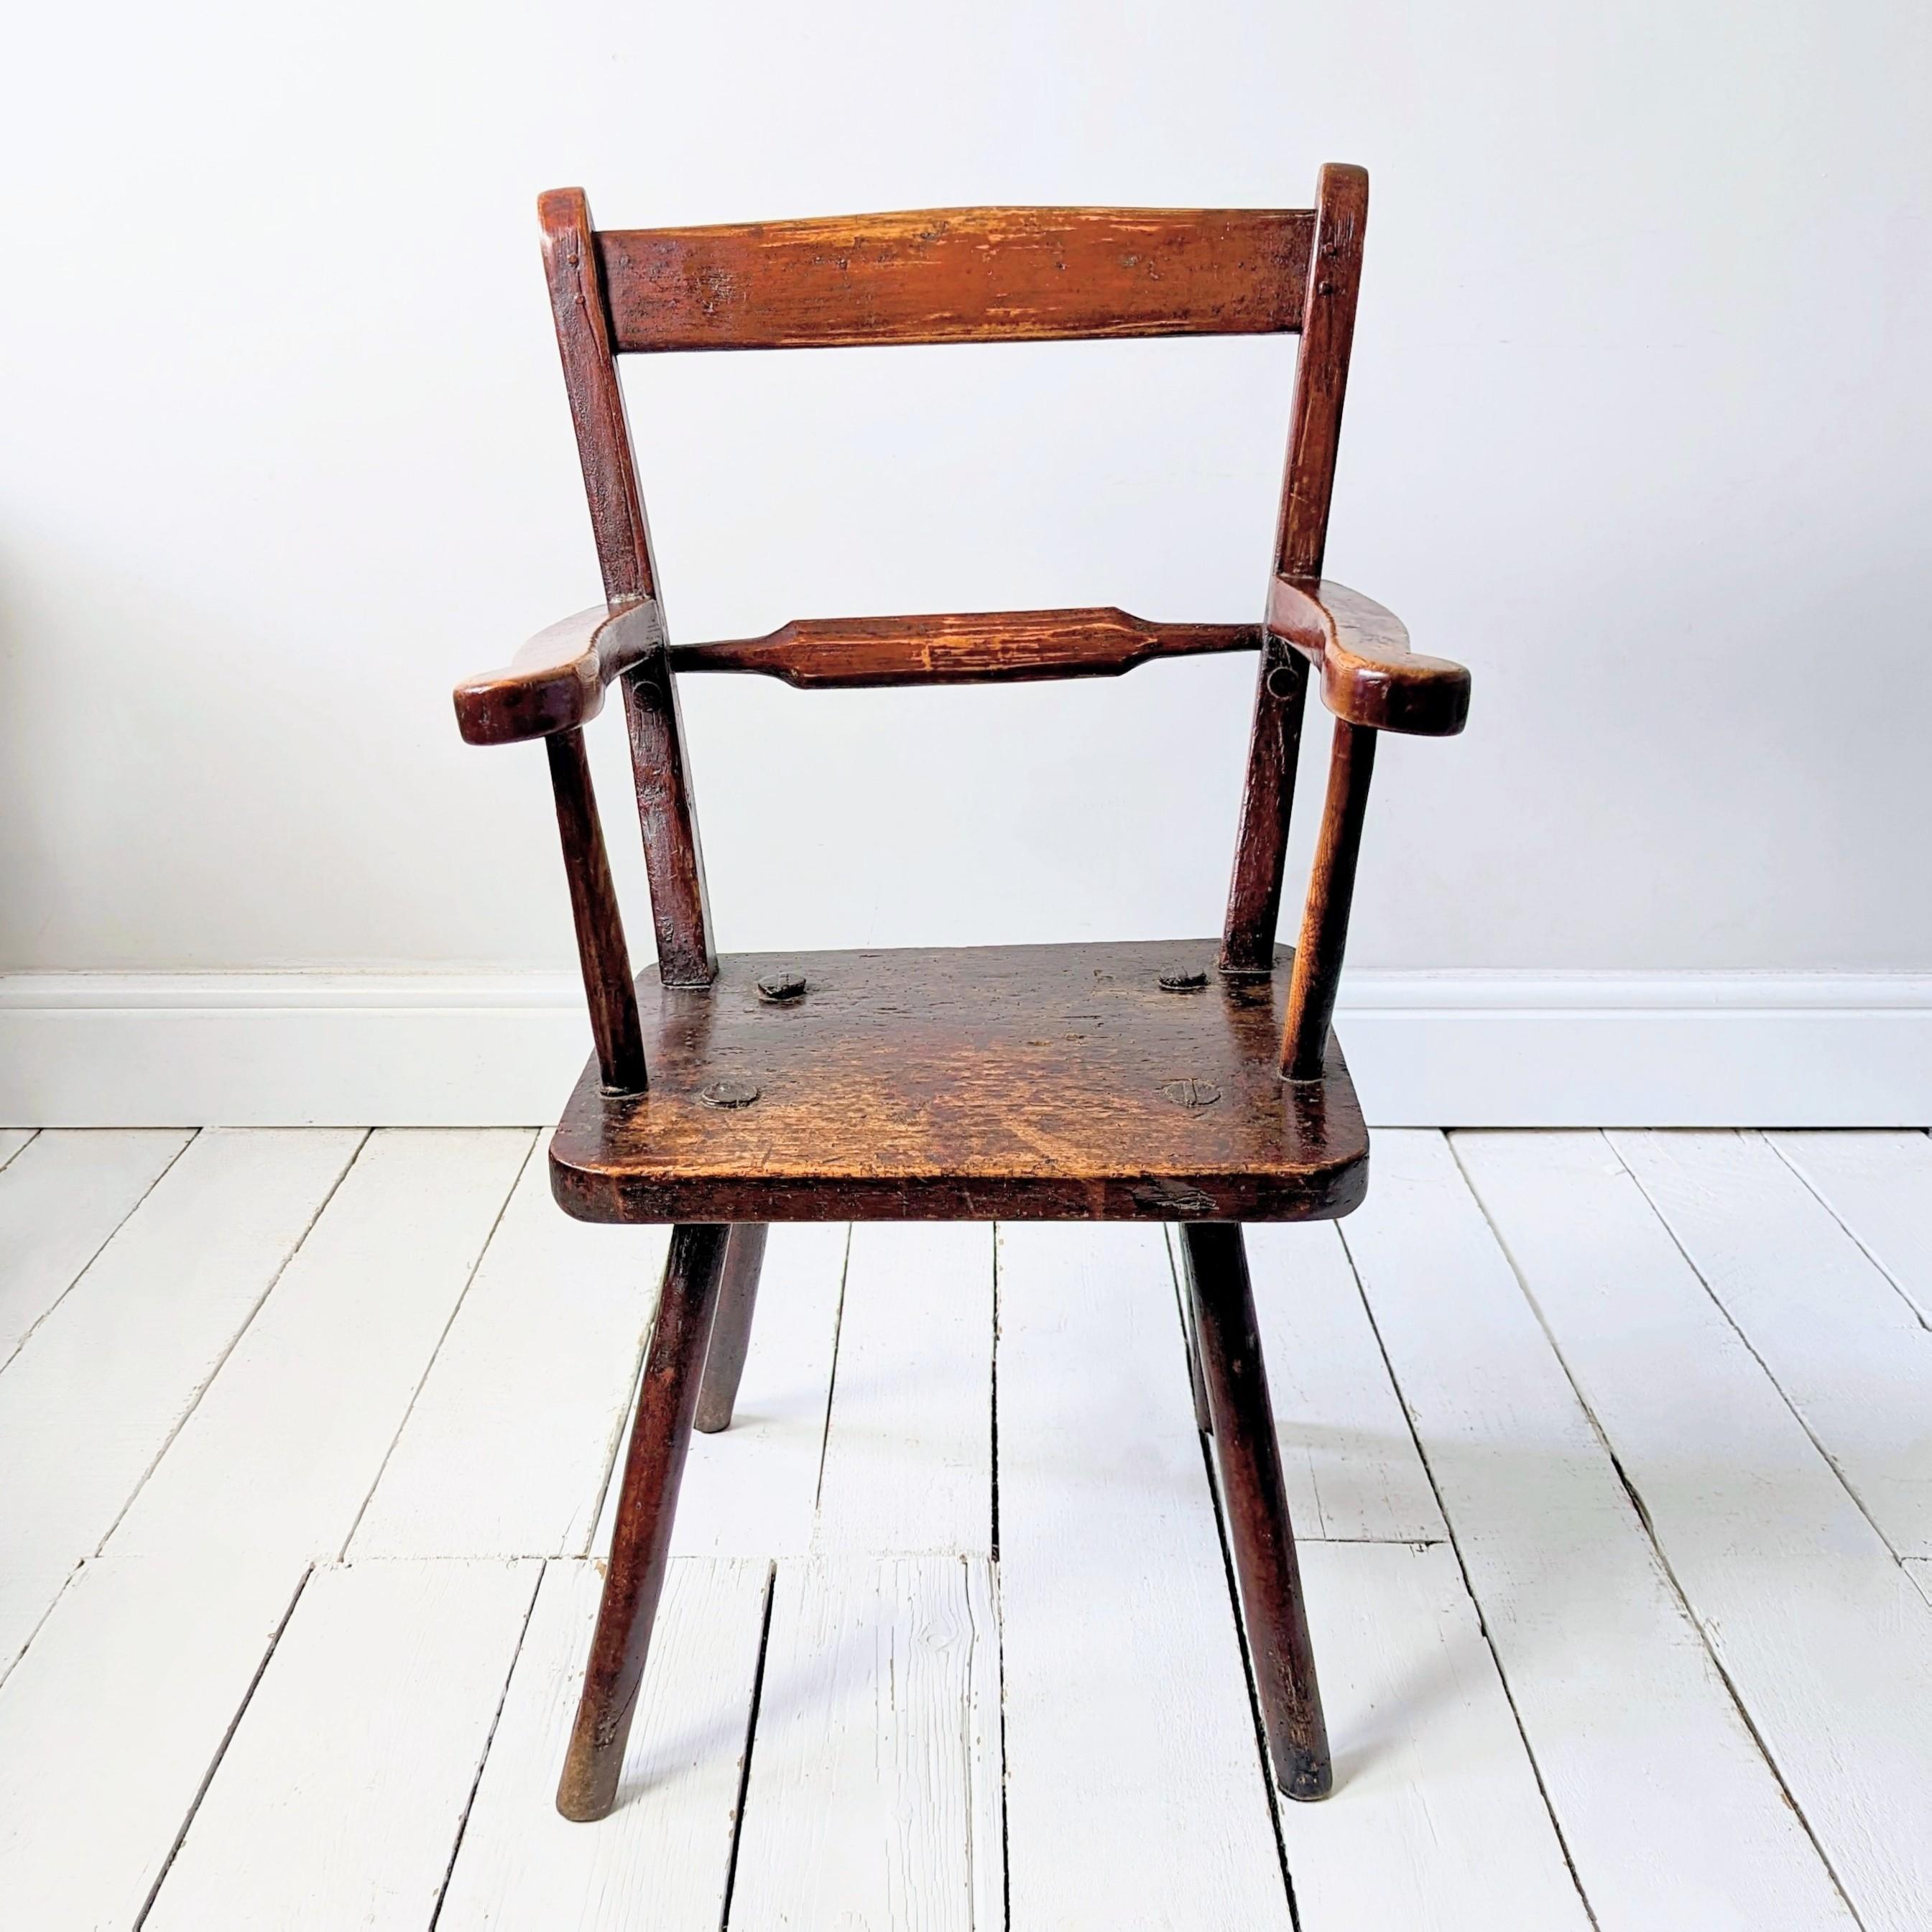 A wonderful scroll-back 'Oxford' style armchair in ash and birch. 

Of sculptural form and a rare, primitive example of the vernacular chair-making style that flourished in the Thames Valley & Chilterns during the late 18th and early 19th